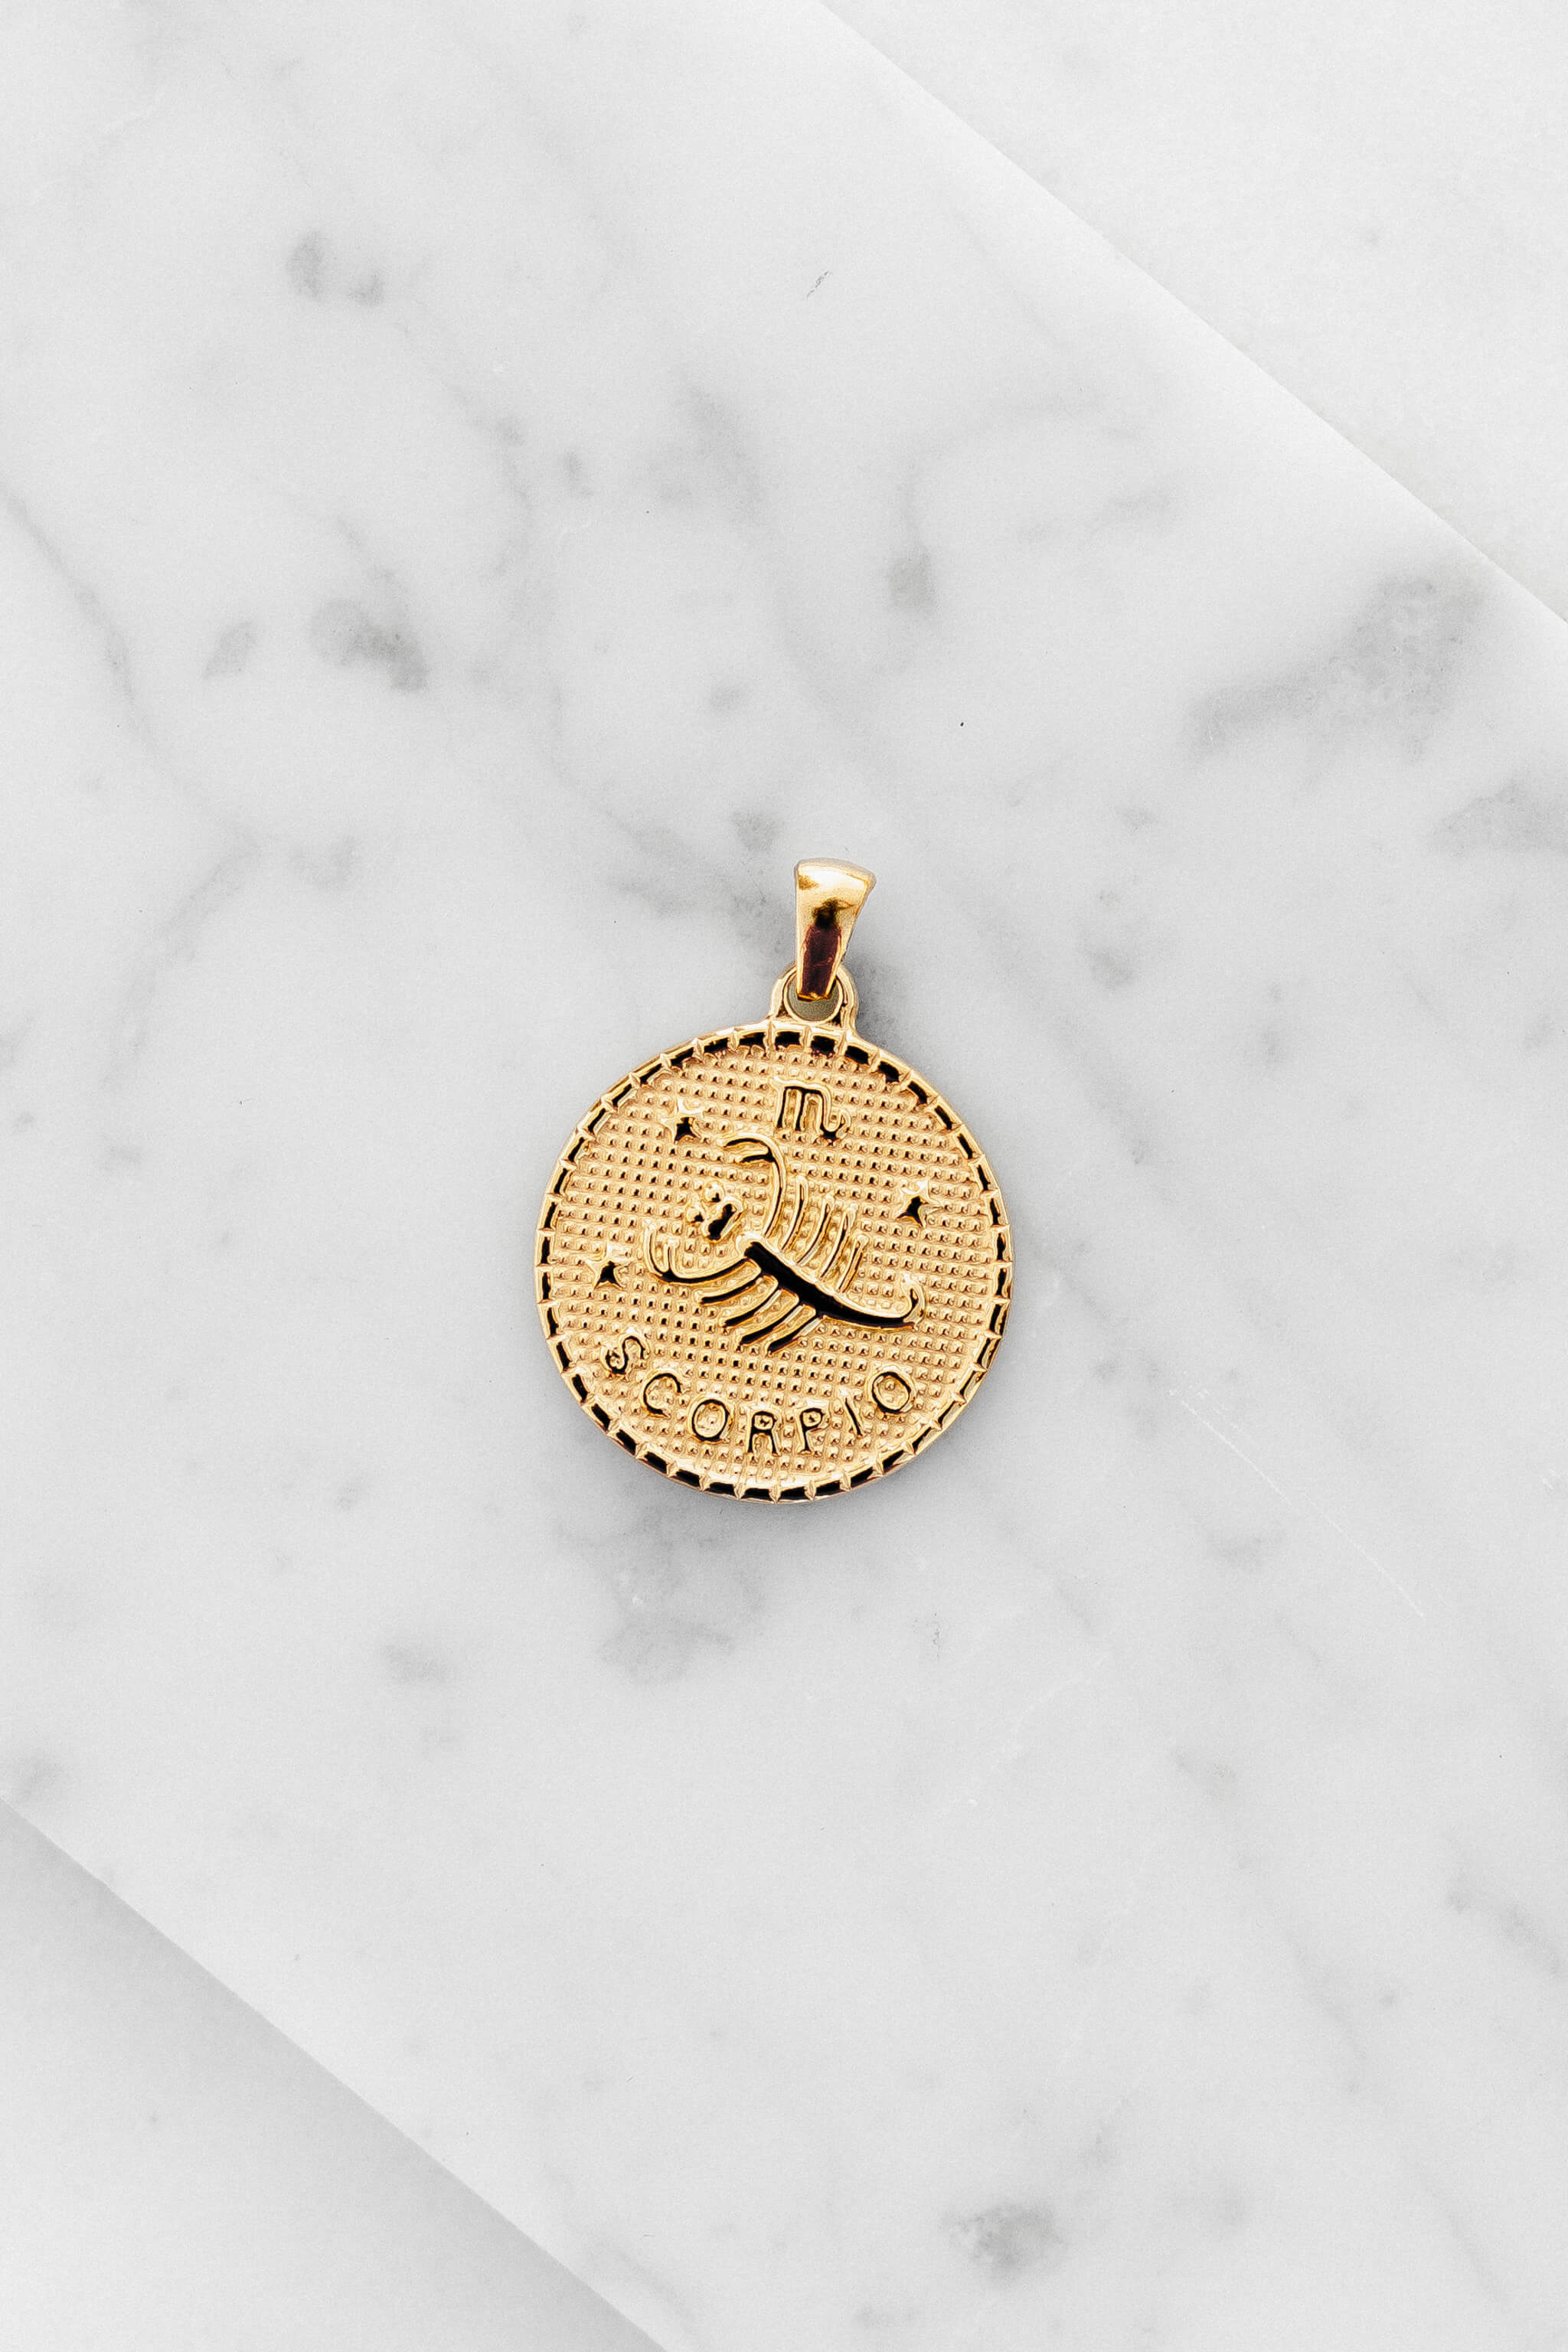 Scorpio zodiac sign gold coin charm laying on a white marble